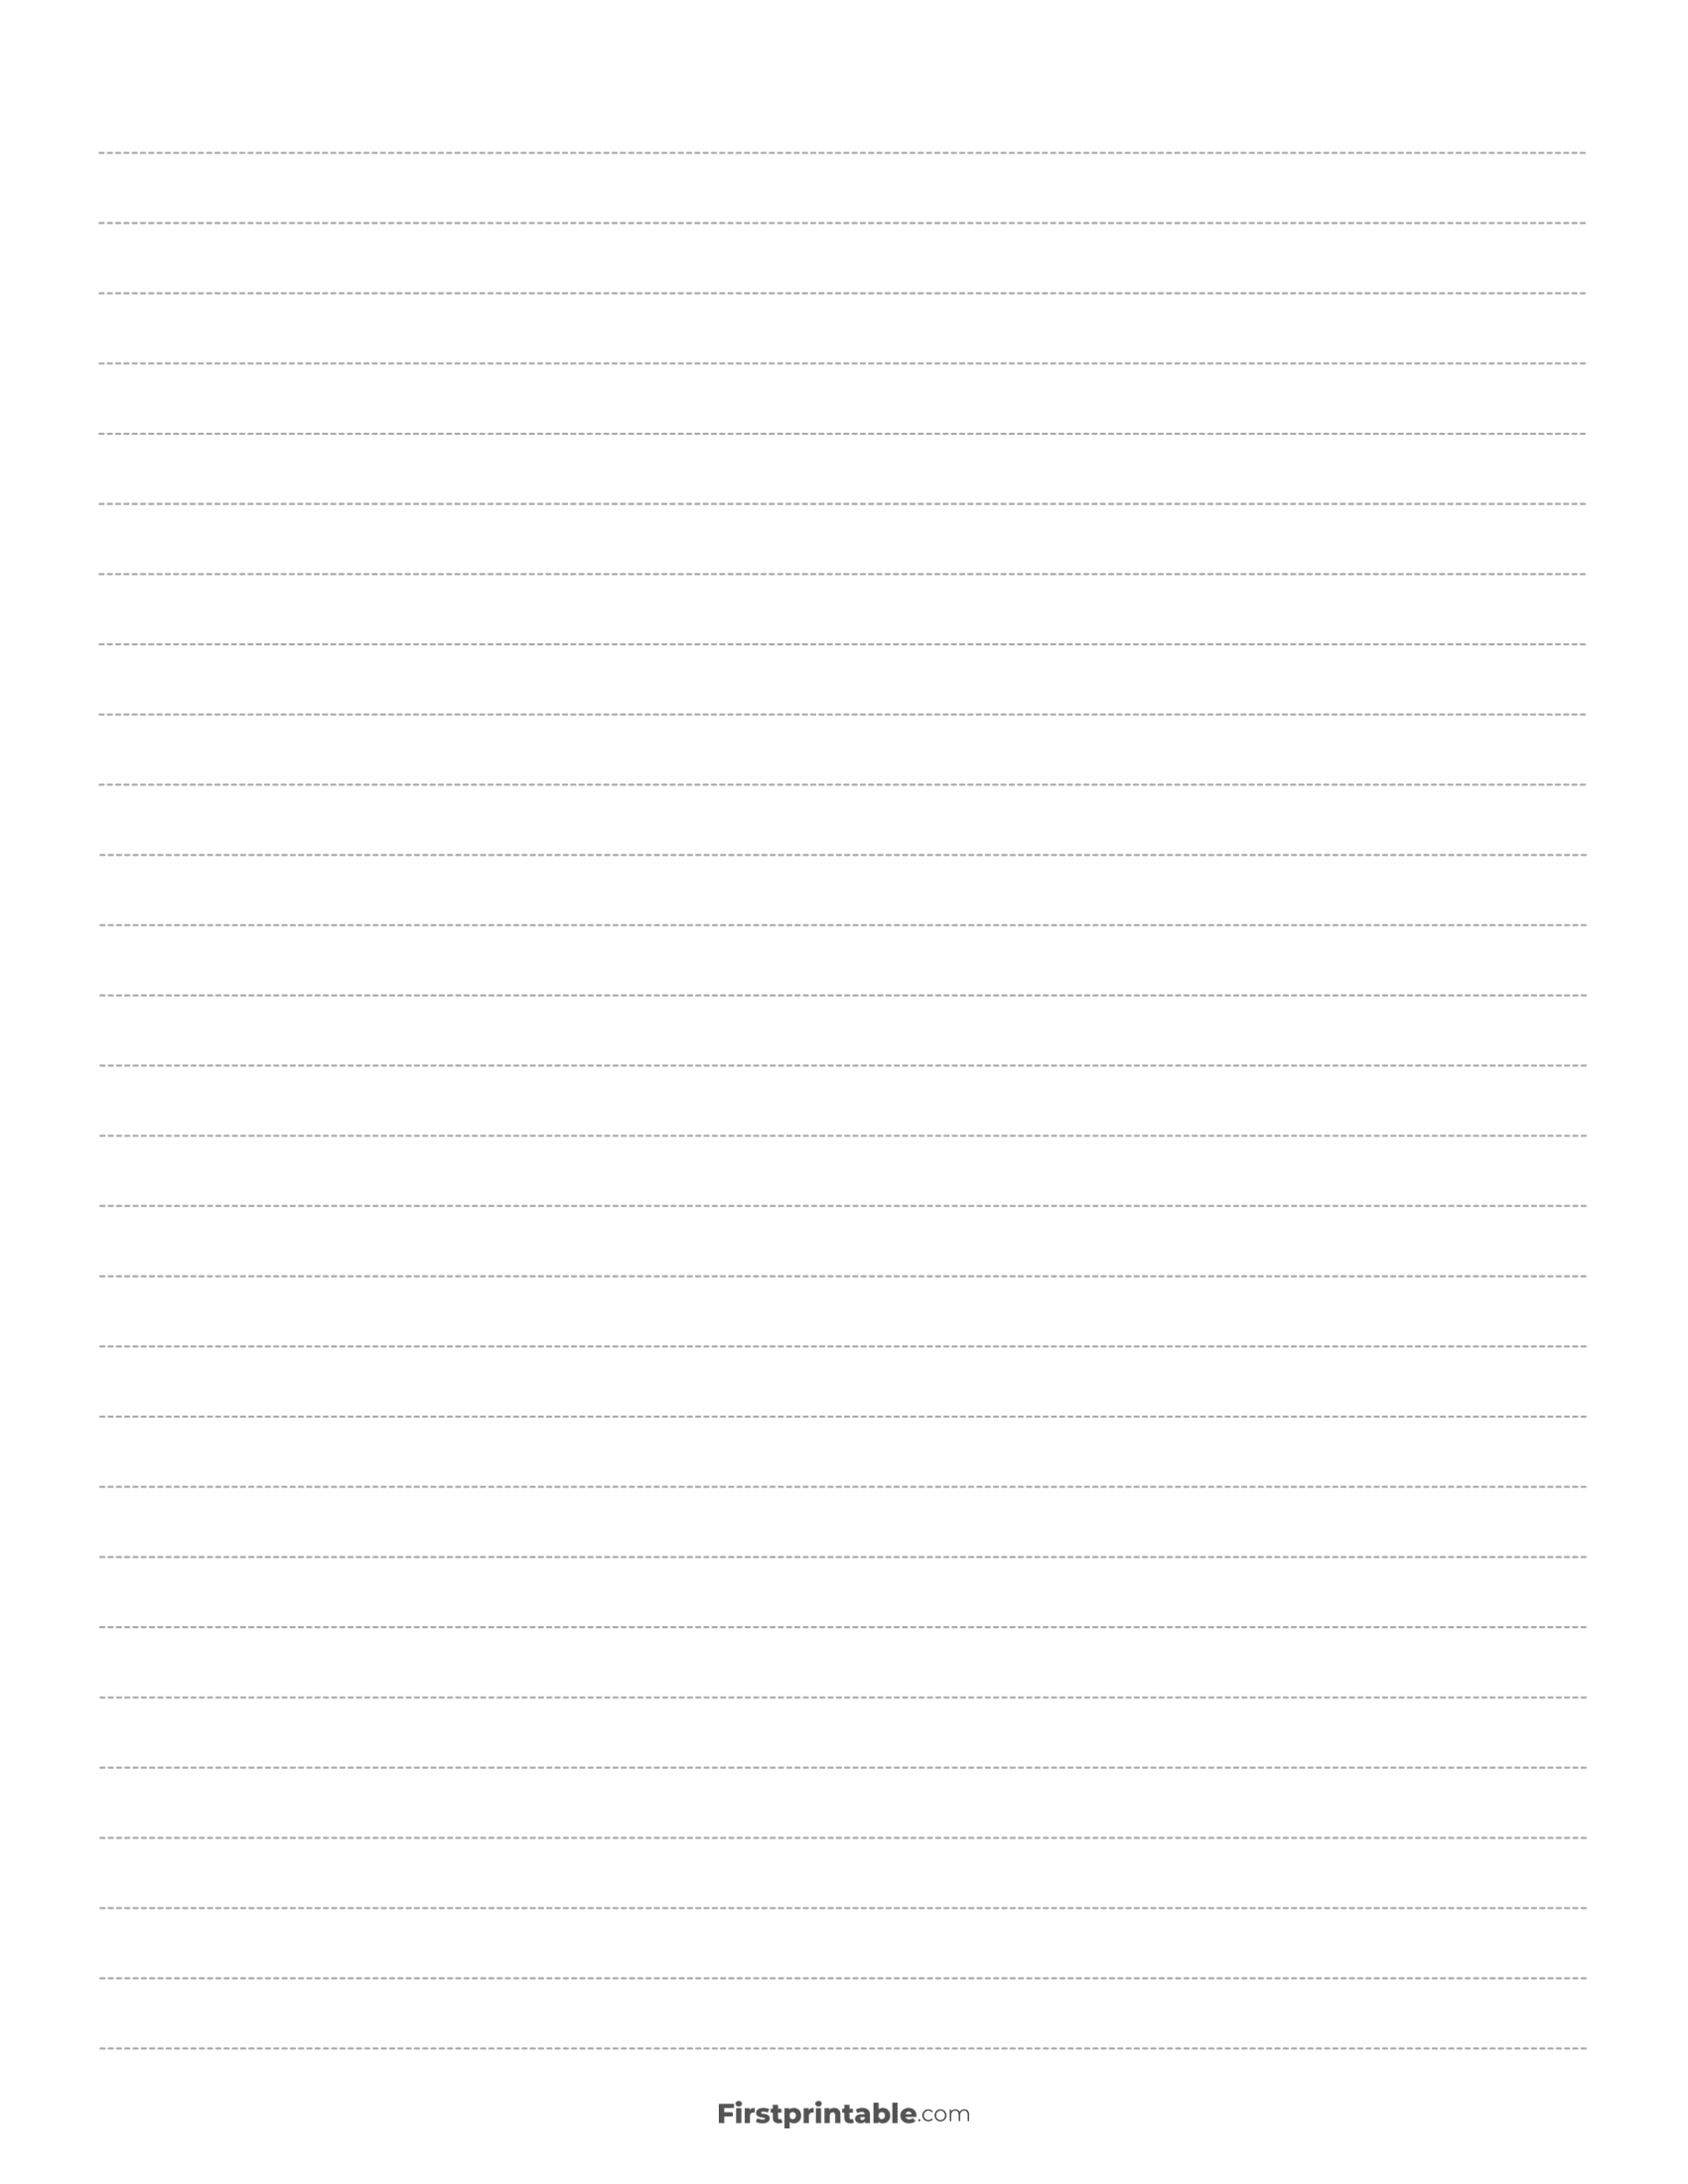 Printable Dash Lined Paper Template - Wide Ruled